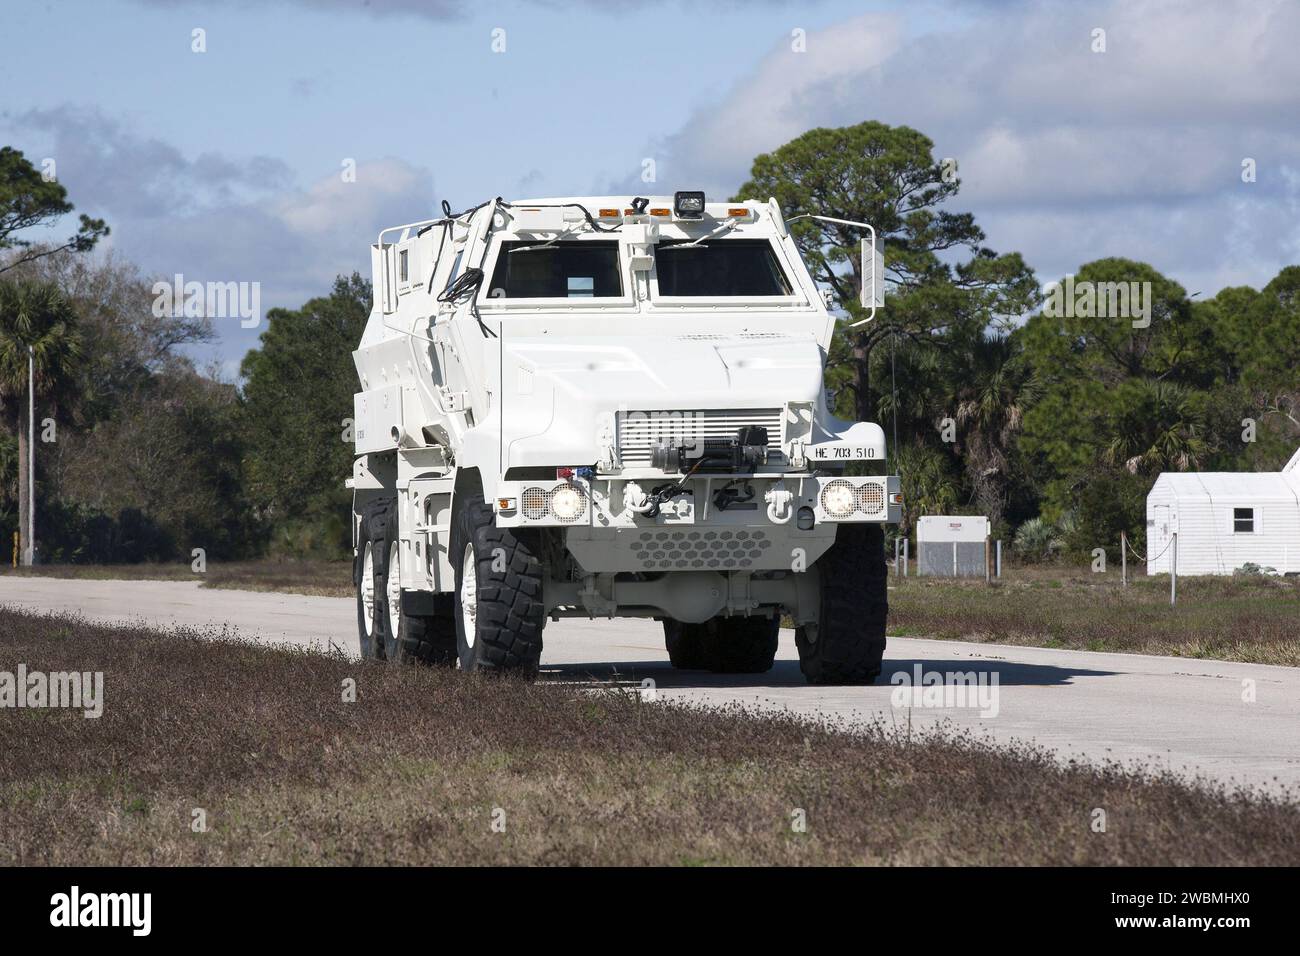 CAPE CANAVERAL, Fla. –One of four new emergency egress vehicles, called Mine-Resistant Ambush-Protection, or MRAP, vehicles is driven to the Maintenance and Operations Facility at NASA’s Kennedy Space Center in Florida. The MRAPs arrived from the U.S. Army Red River Depot in Texarkana, Texas in December 2013. The vehicles were processed in and then transported to the Rotation, Processing and Surge Facility near the Vehicle Assembly Building for temporary storage. The Ground Systems Development and Operations Program at Kennedy led the efforts to an emergency egress vehicle that future astronau Stock Photo